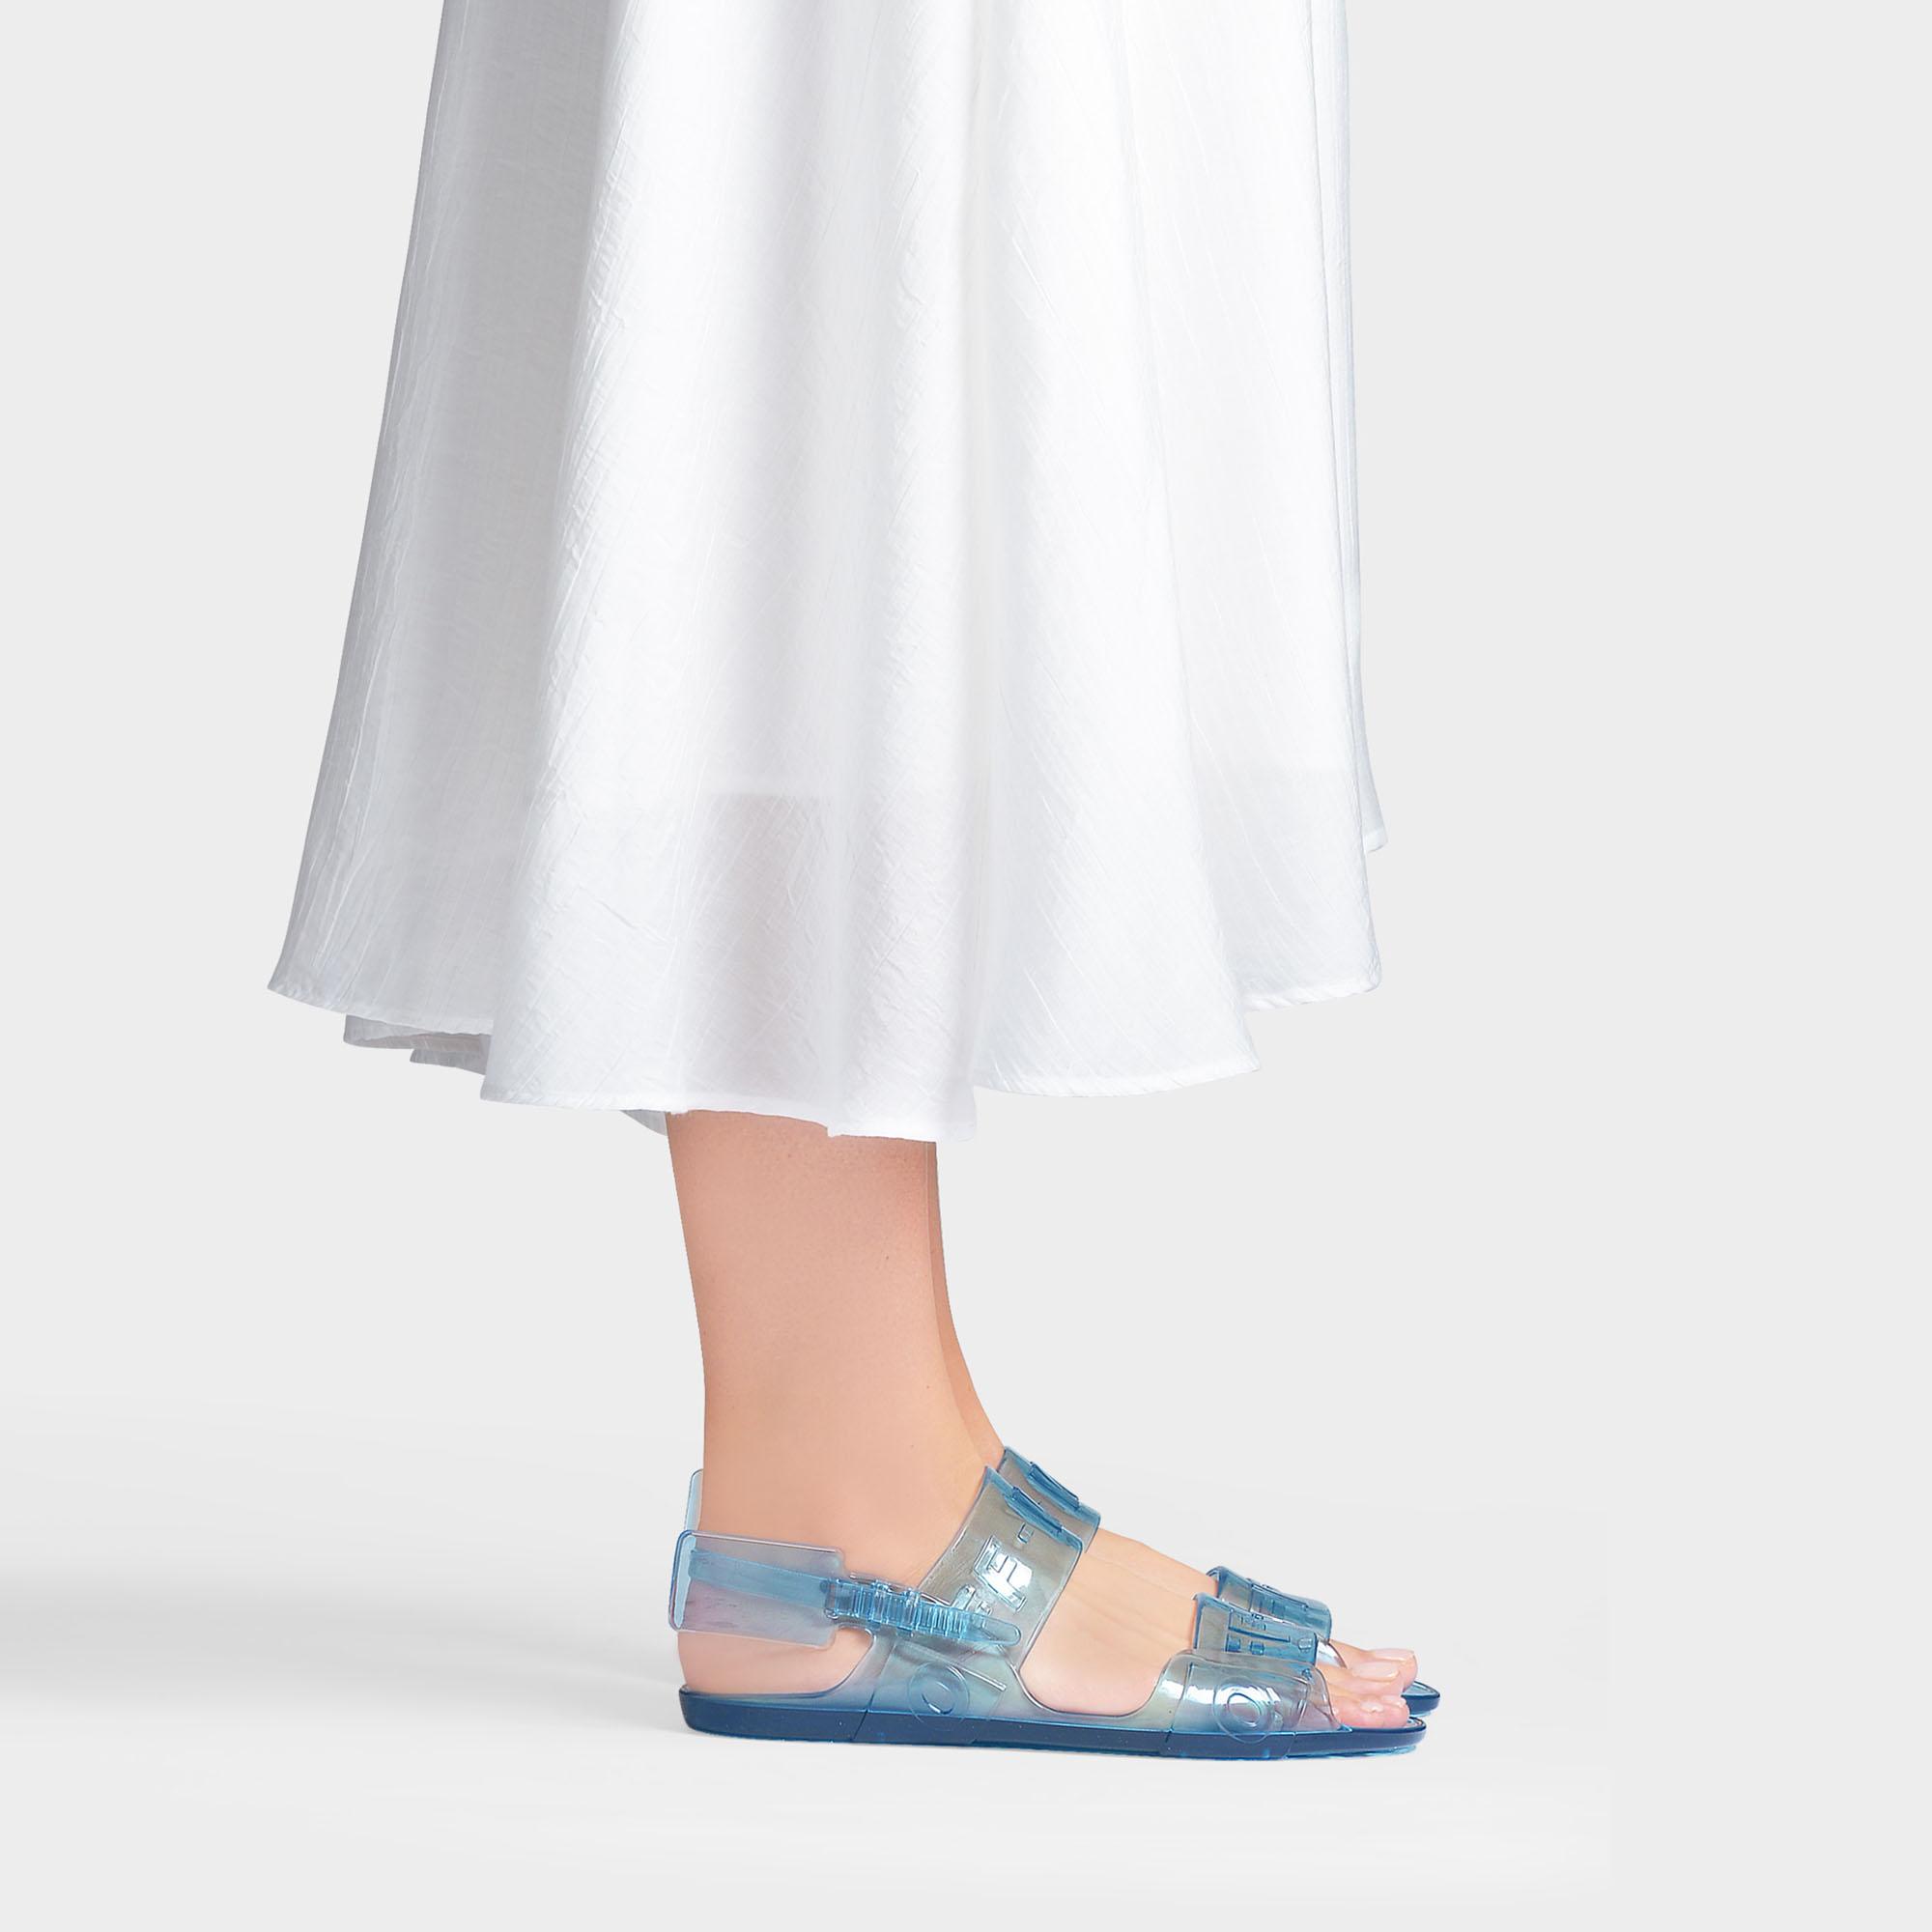 Off-White c/o Virgil Abloh Logo Rubber Jelly Sandals in Blue | Lyst